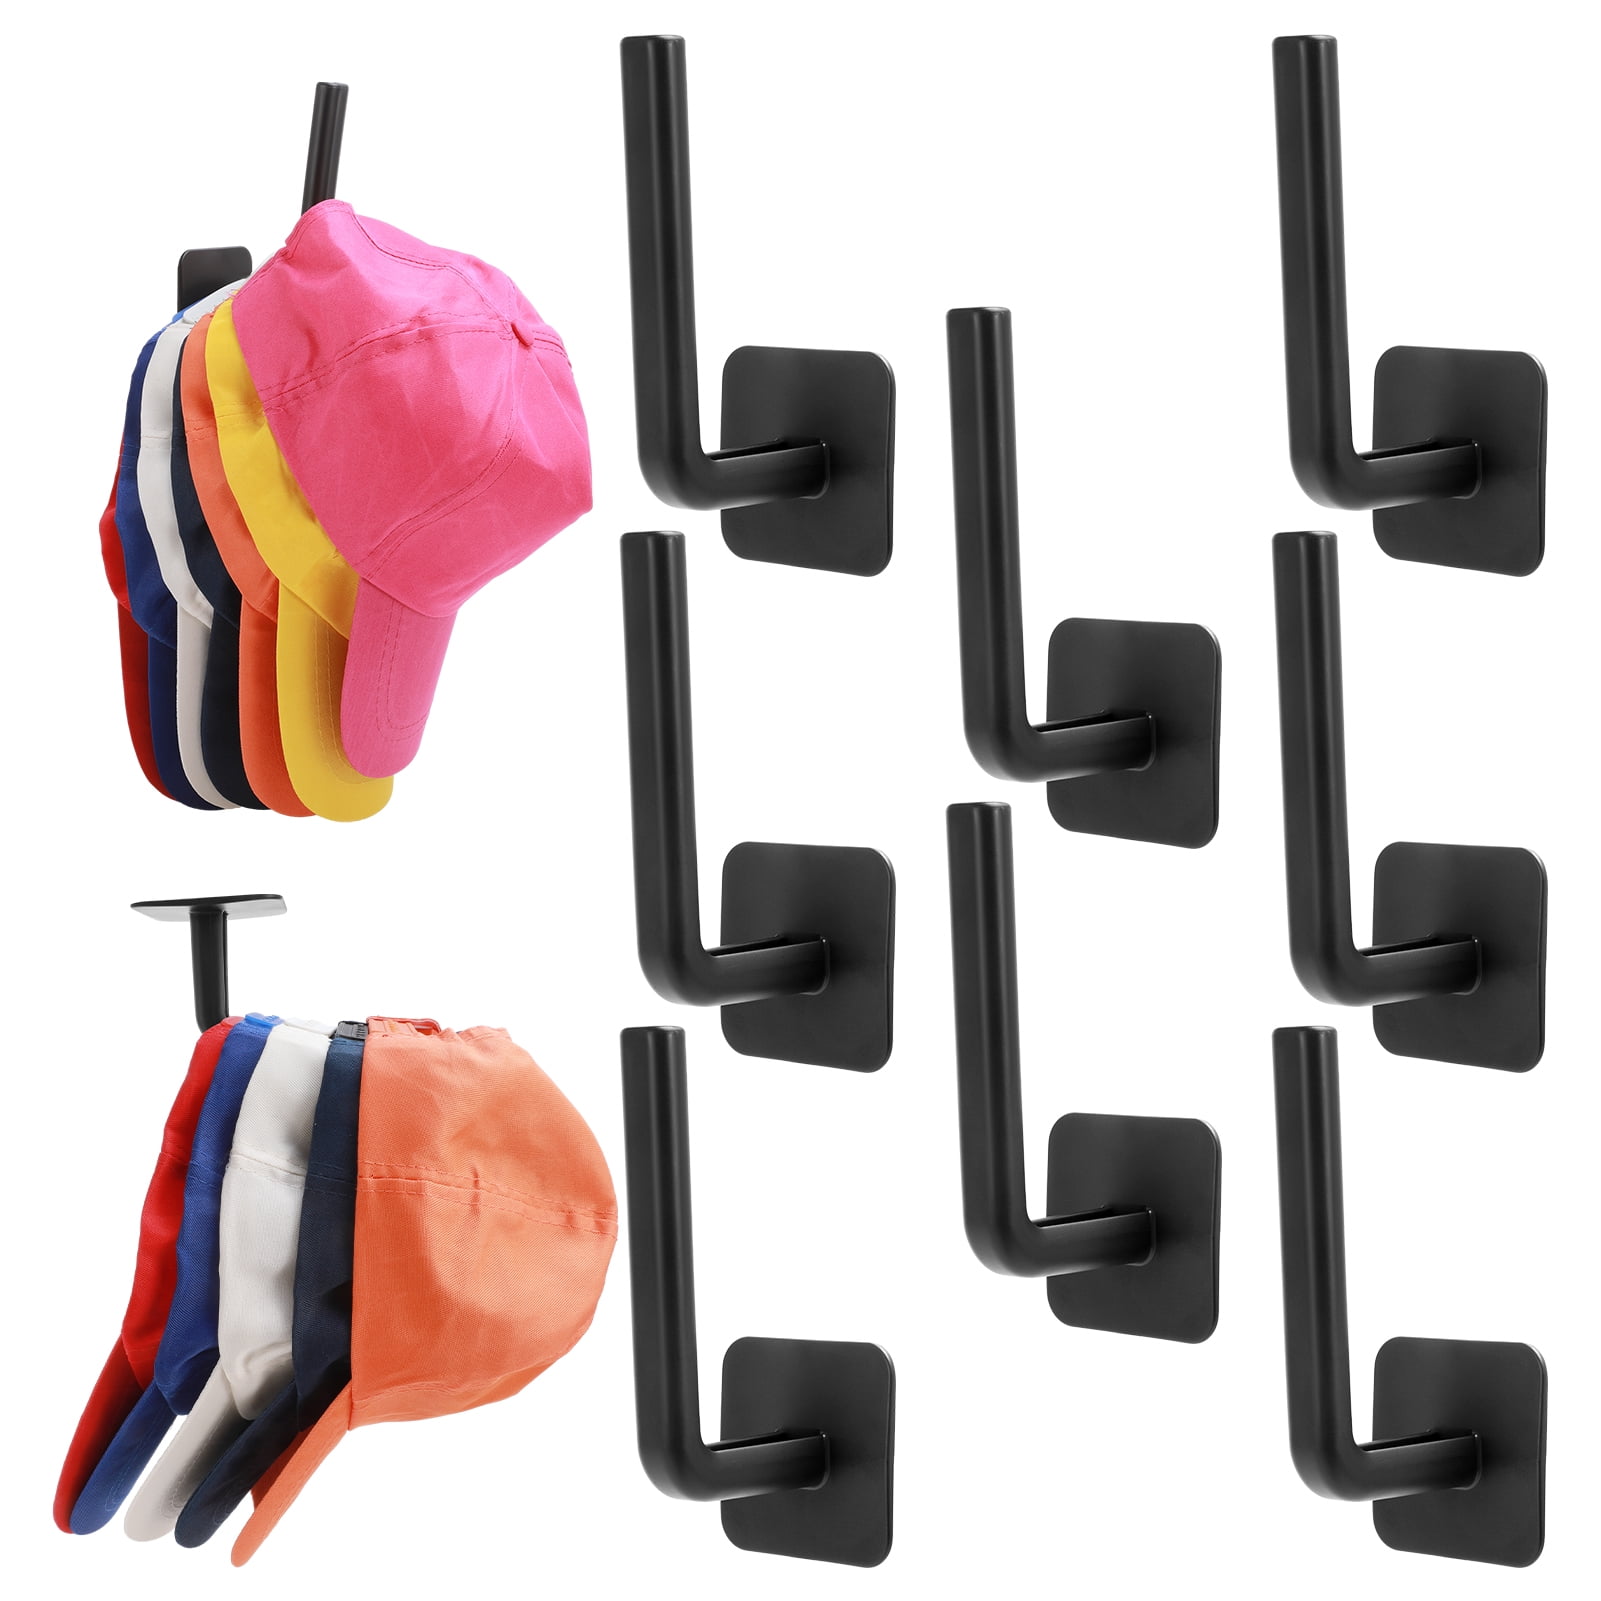 Modern JP Adhesive Hat Hooks for Wall (16-Pack) - Minimalist Hat